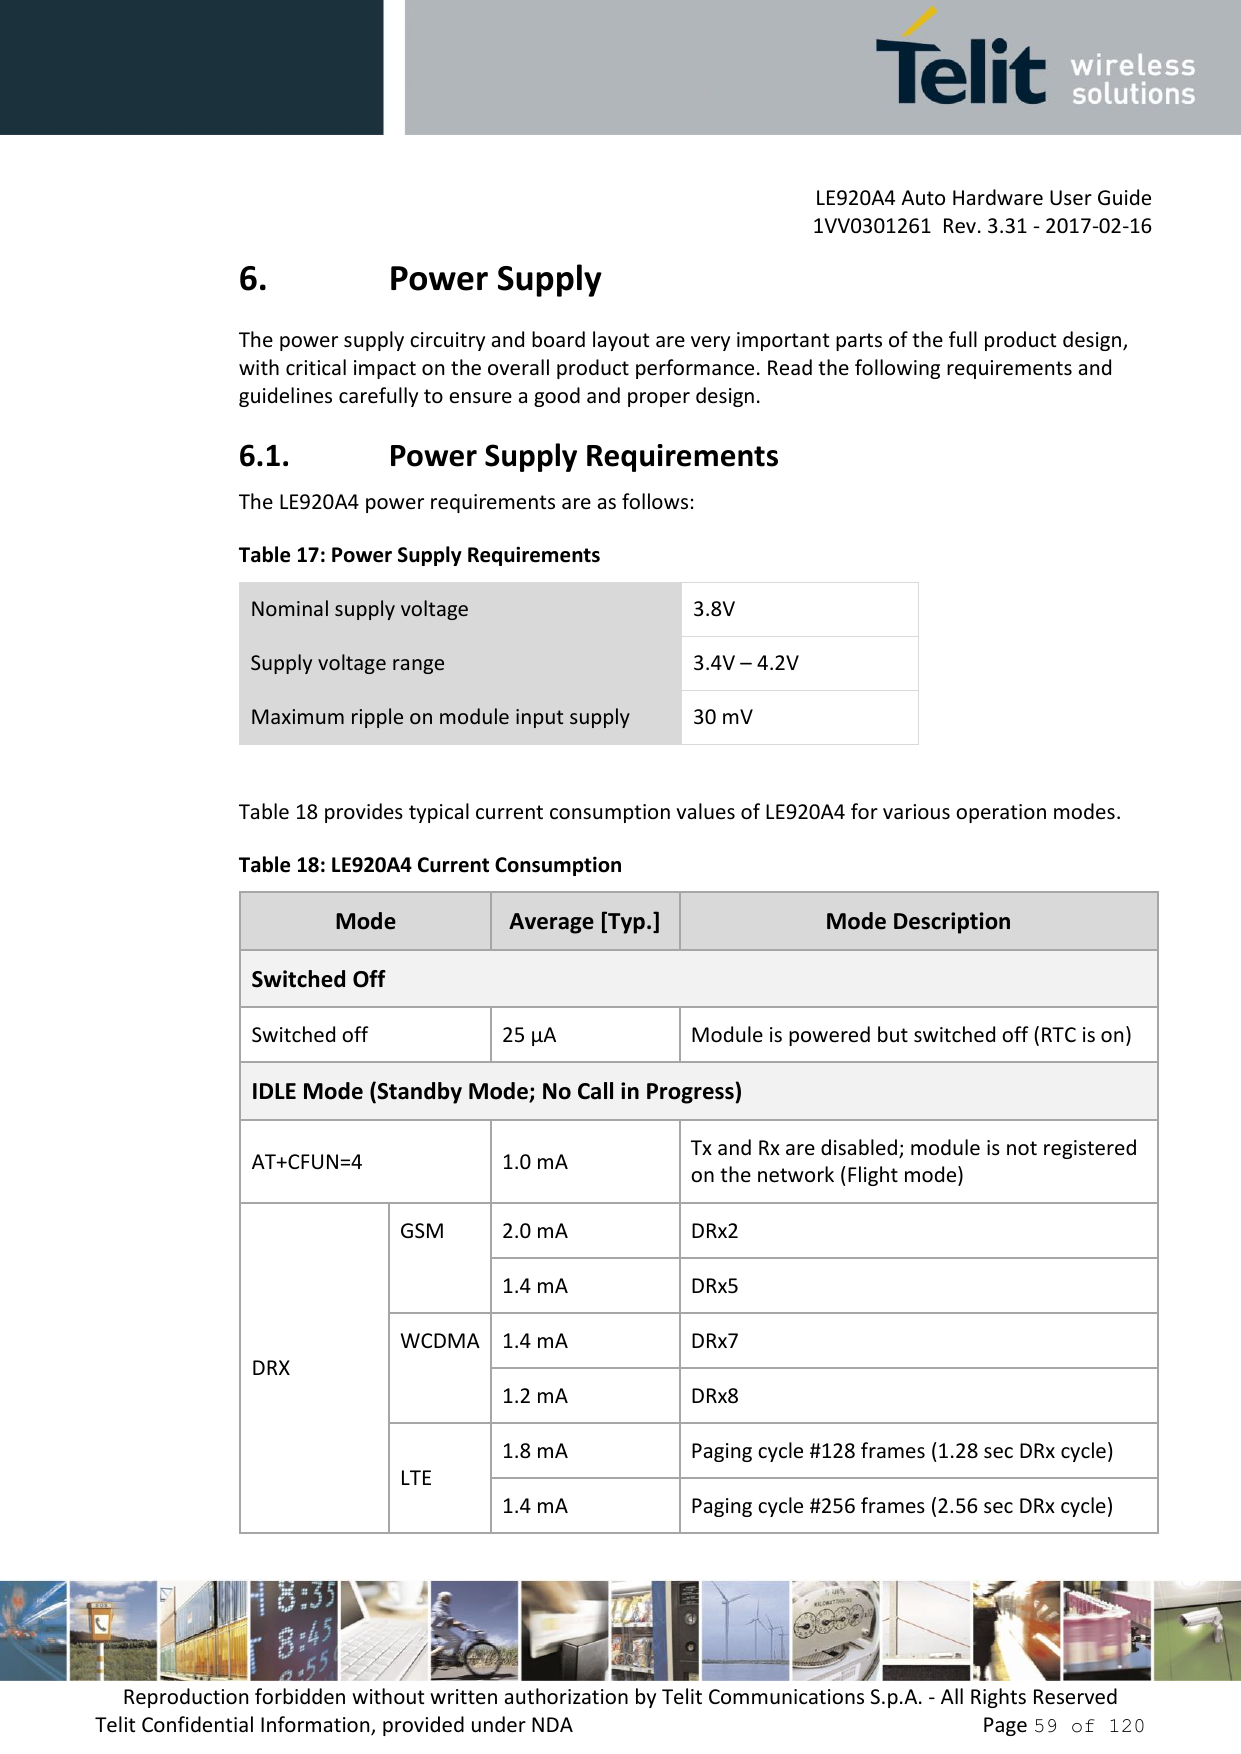         LE920A4 Auto Hardware User Guide     1VV0301261  Rev. 3.31 - 2017-02-16 Reproduction forbidden without written authorization by Telit Communications S.p.A. - All Rights Reserved Telit Confidential Information, provided under NDA                 Page 59 of 120 6. Power Supply The power supply circuitry and board layout are very important parts of the full product design, with critical impact on the overall product performance. Read the following requirements and guidelines carefully to ensure a good and proper design. 6.1. Power Supply Requirements The LE920A4 power requirements are as follows: Table 17: Power Supply Requirements Nominal supply voltage 3.8V Supply voltage range 3.4V – 4.2V Maximum ripple on module input supply 30 mV  Table 18 provides typical current consumption values of LE920A4 for various operation modes. Table 18: LE920A4 Current Consumption Mode Average [Typ.] Mode Description Switched Off Switched off 25 µA Module is powered but switched off (RTC is on) IDLE Mode (Standby Mode; No Call in Progress) AT+CFUN=4 1.0 mA Tx and Rx are disabled; module is not registered on the network (Flight mode)  DRX GSM 2.0 mA DRx2 1.4 mA DRx5 WCDMA 1.4 mA DRx7 1.2 mA DRx8 LTE 1.8 mA Paging cycle #128 frames (1.28 sec DRx cycle) 1.4 mA Paging cycle #256 frames (2.56 sec DRx cycle) 